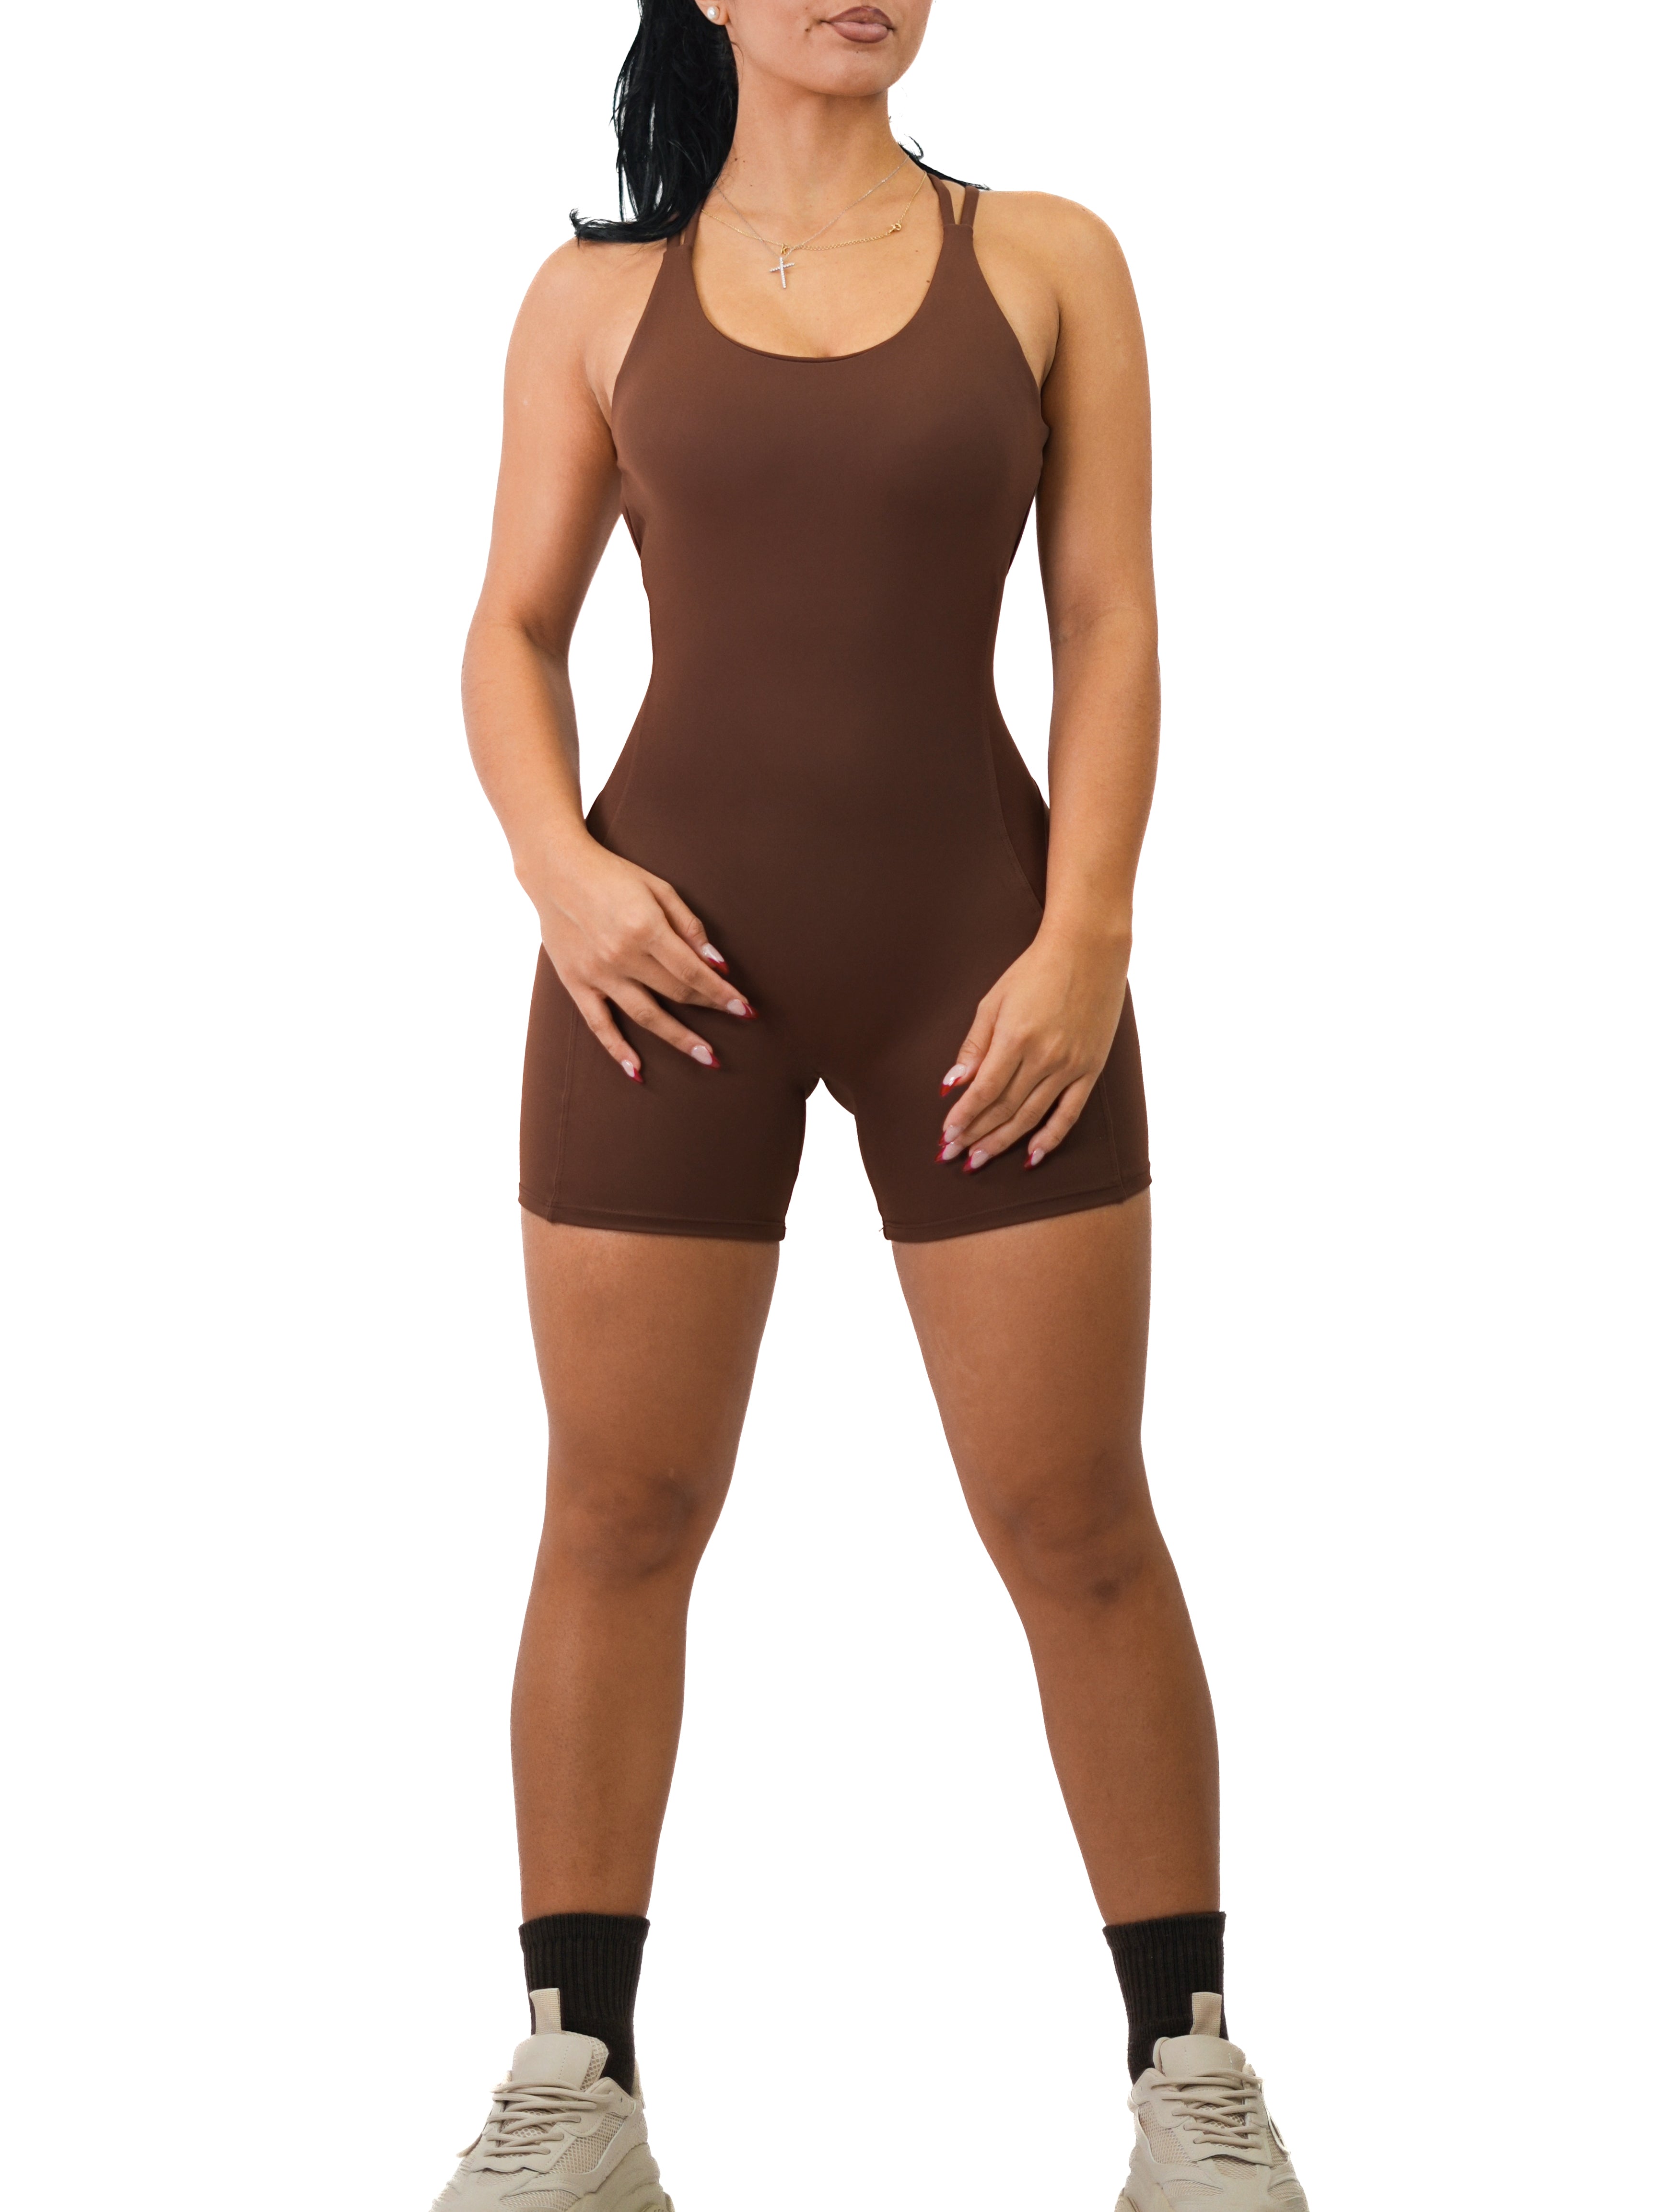 Fitted Short Romper (Sweet Brown)